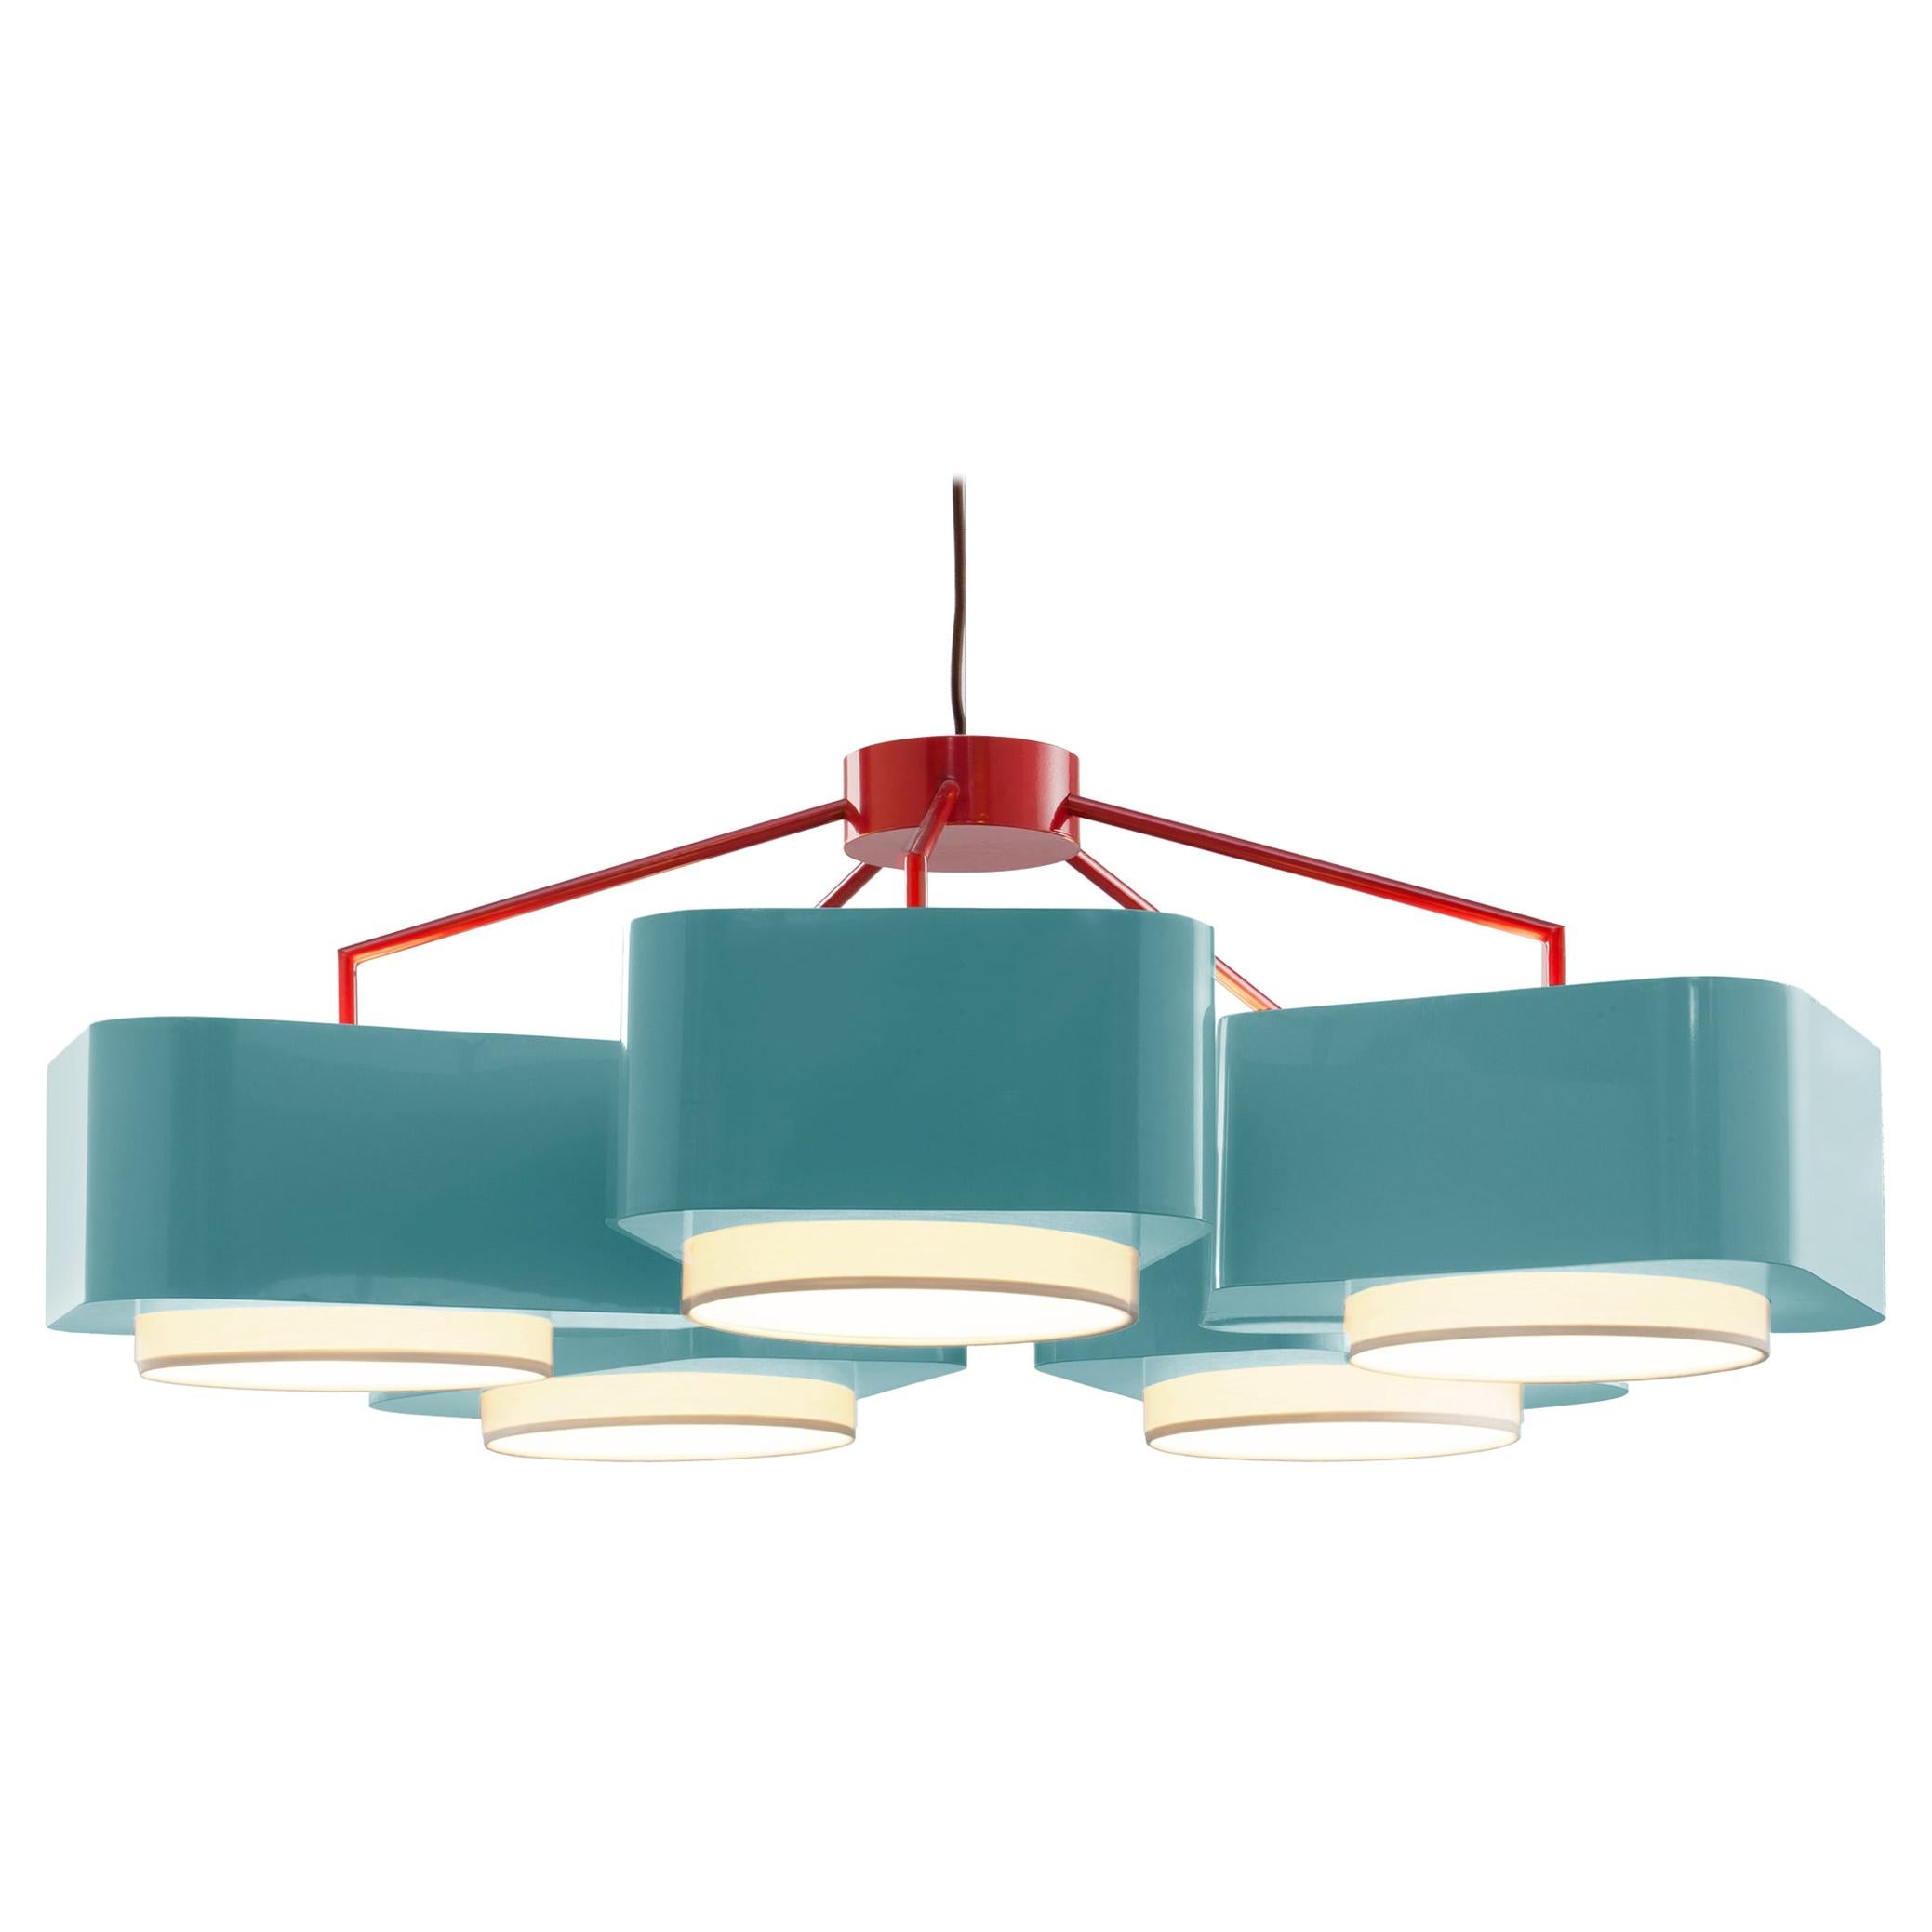 Carousel suspension lamp has a delicate balance of form and function that produces a quiet, modern light ambiance for all to savour, with its Contemporary Art Deco lines. 
The structure is finished in a smooth, homogeneous powder coating layer. The